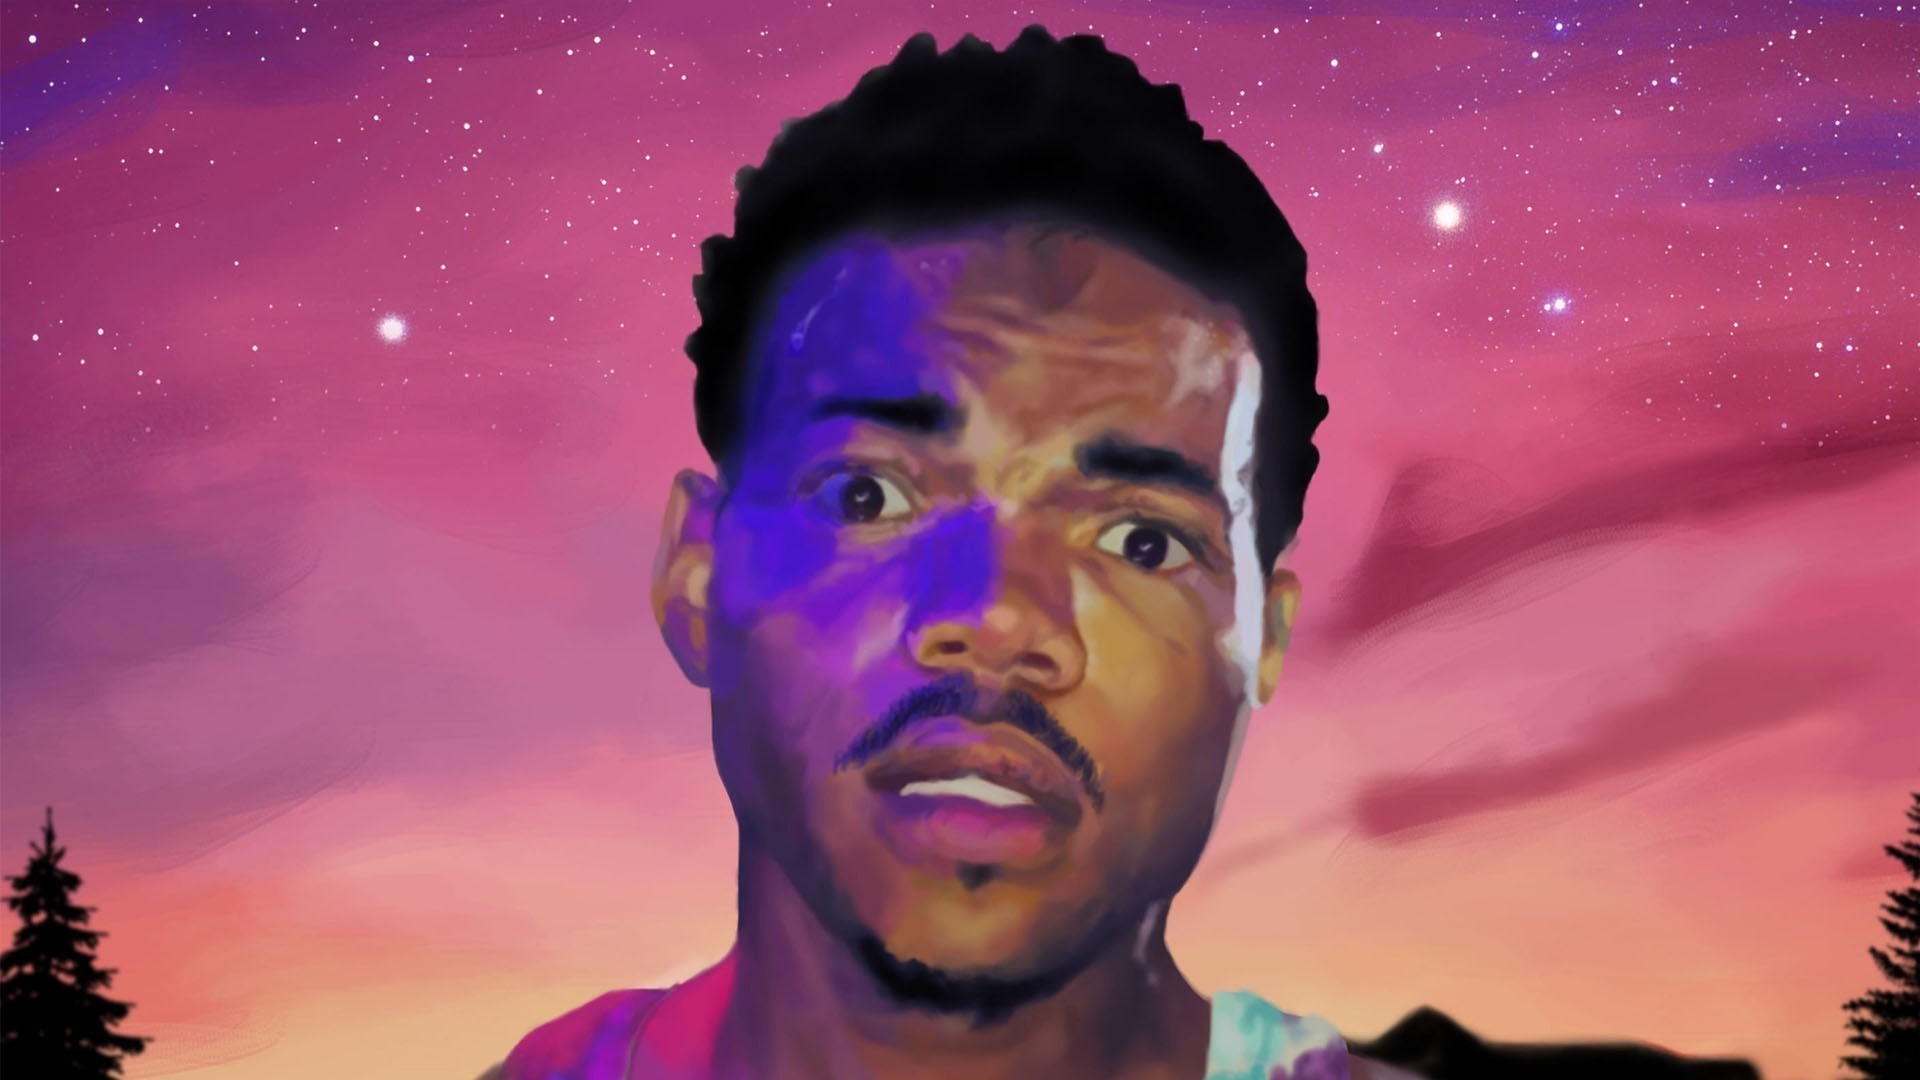 1920x1080 chance the rapper pictures for large desktop, Cooper Chester 2017-03-23